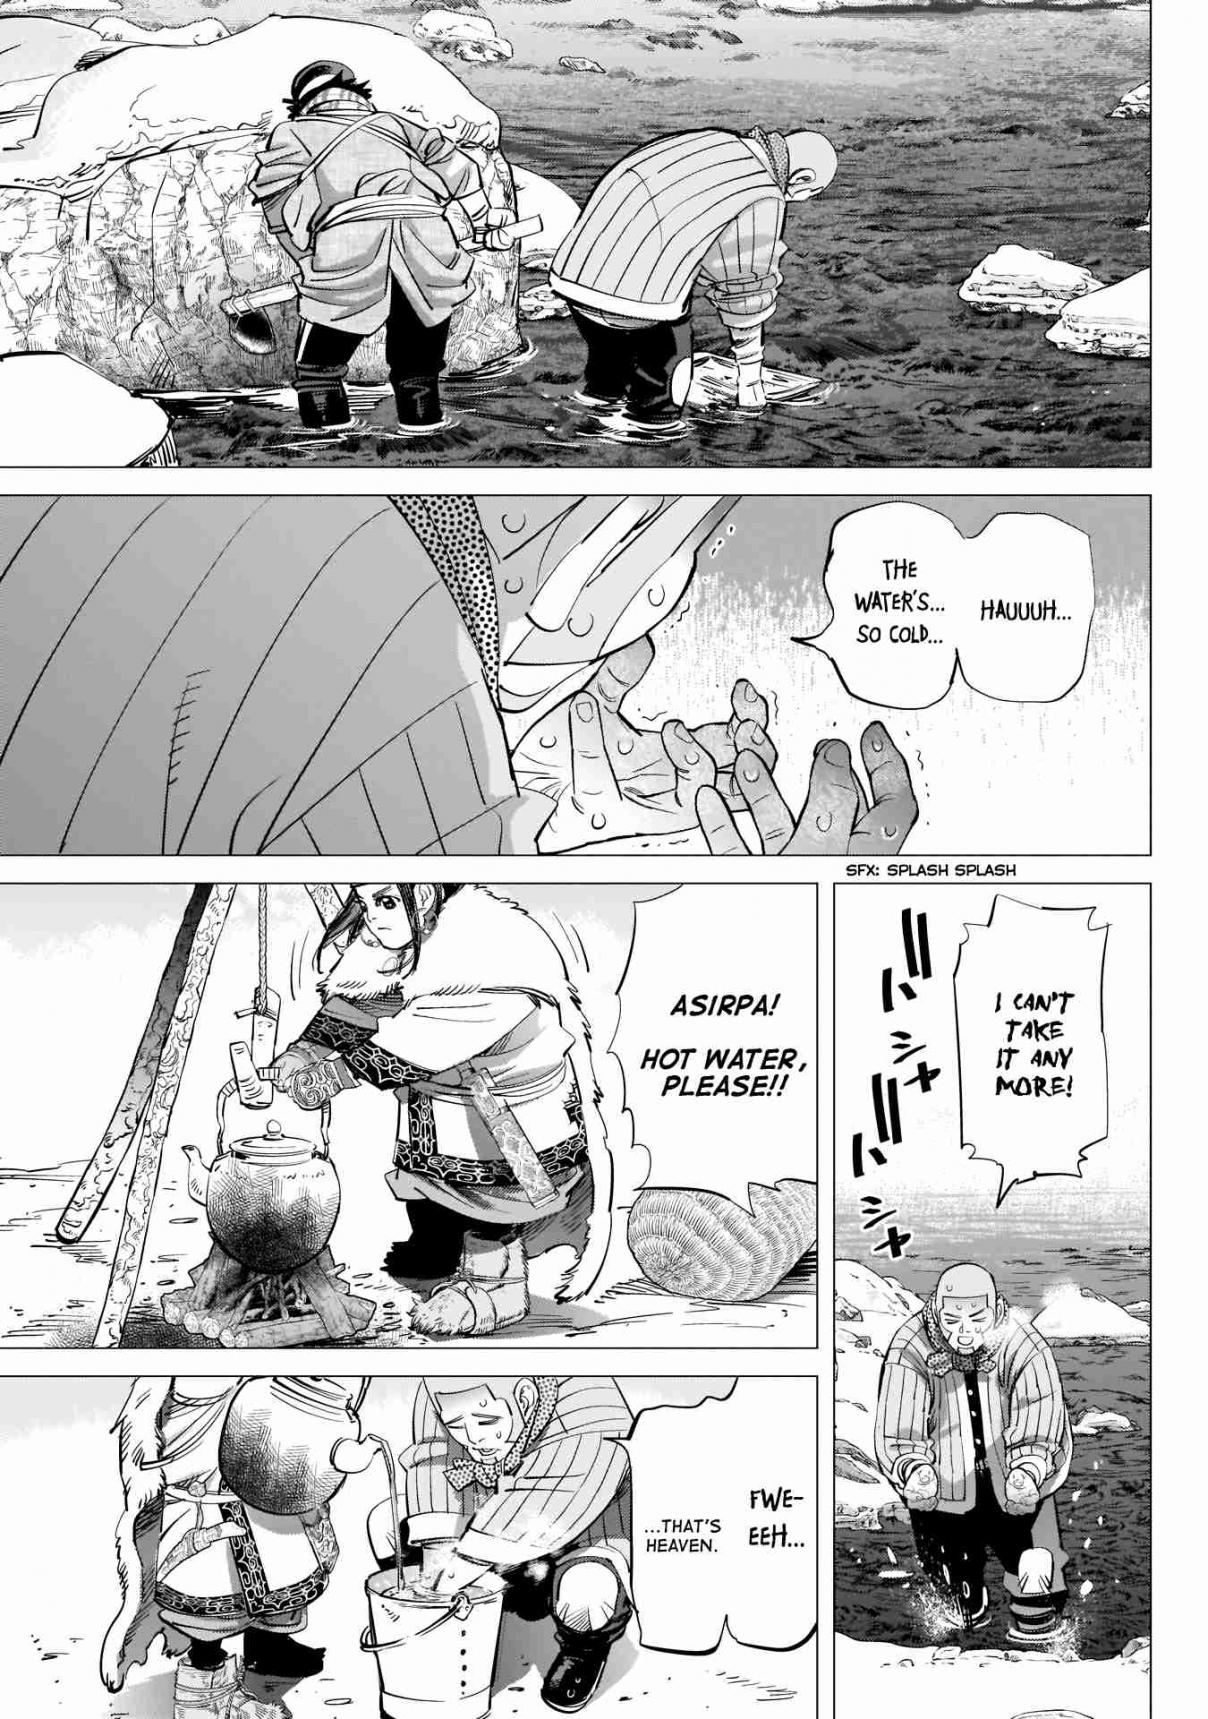 Golden Kamuy Ch. 218 The Gold Dust Panners